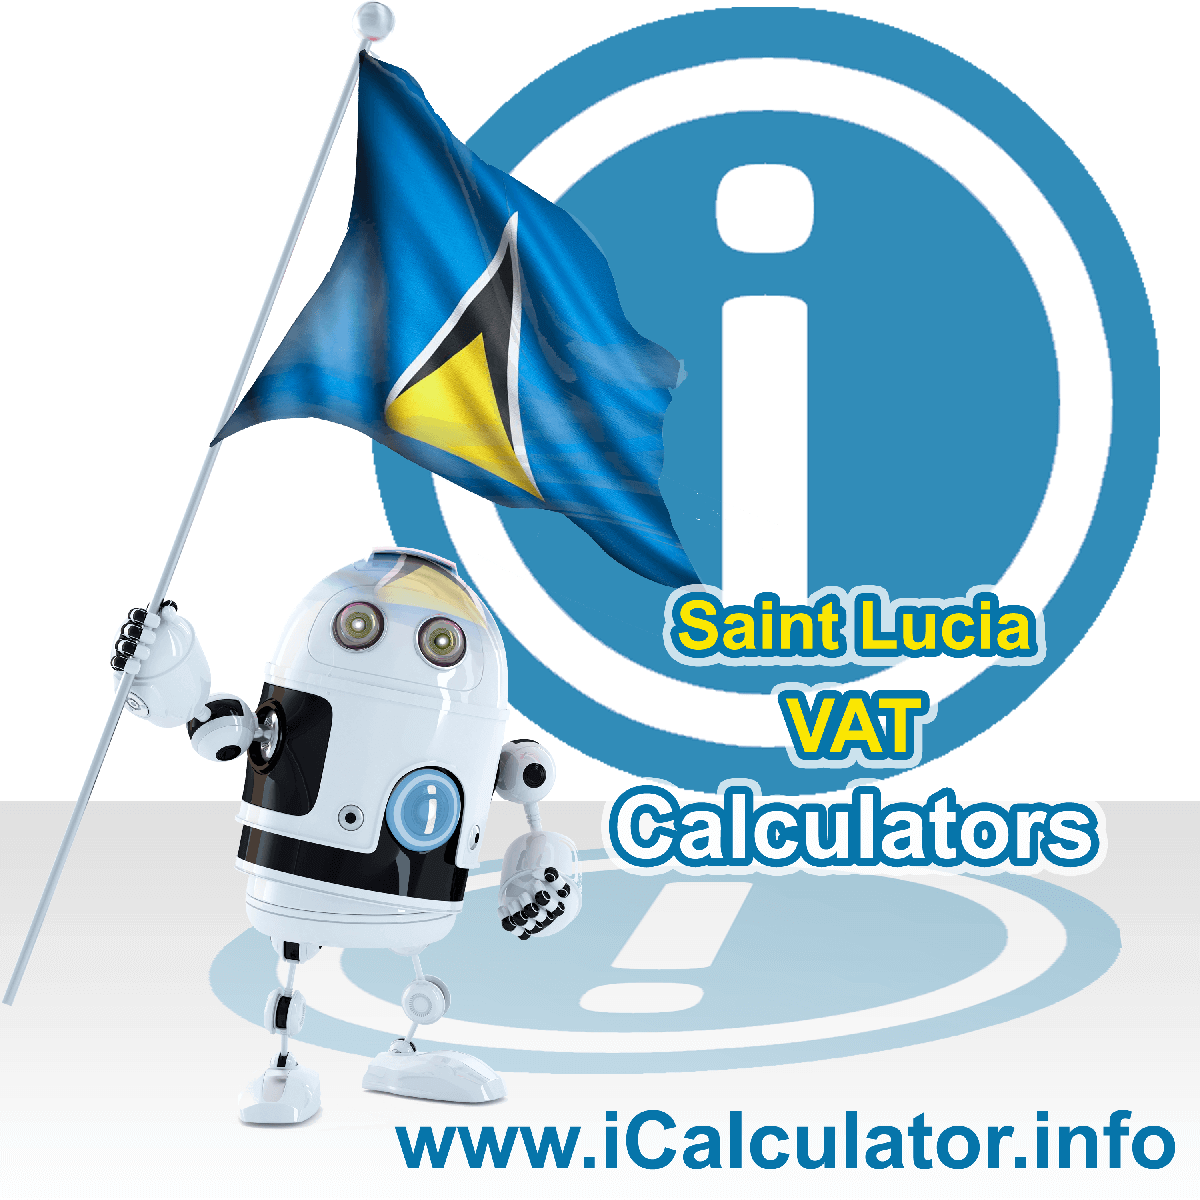 Saint Lucia VAT Calculator. This image shows the Saint Lucia flag and information relating to the VAT formula used for calculating Value Added Tax in Saint Lucia using the Saint Lucia VAT Calculator in 2023